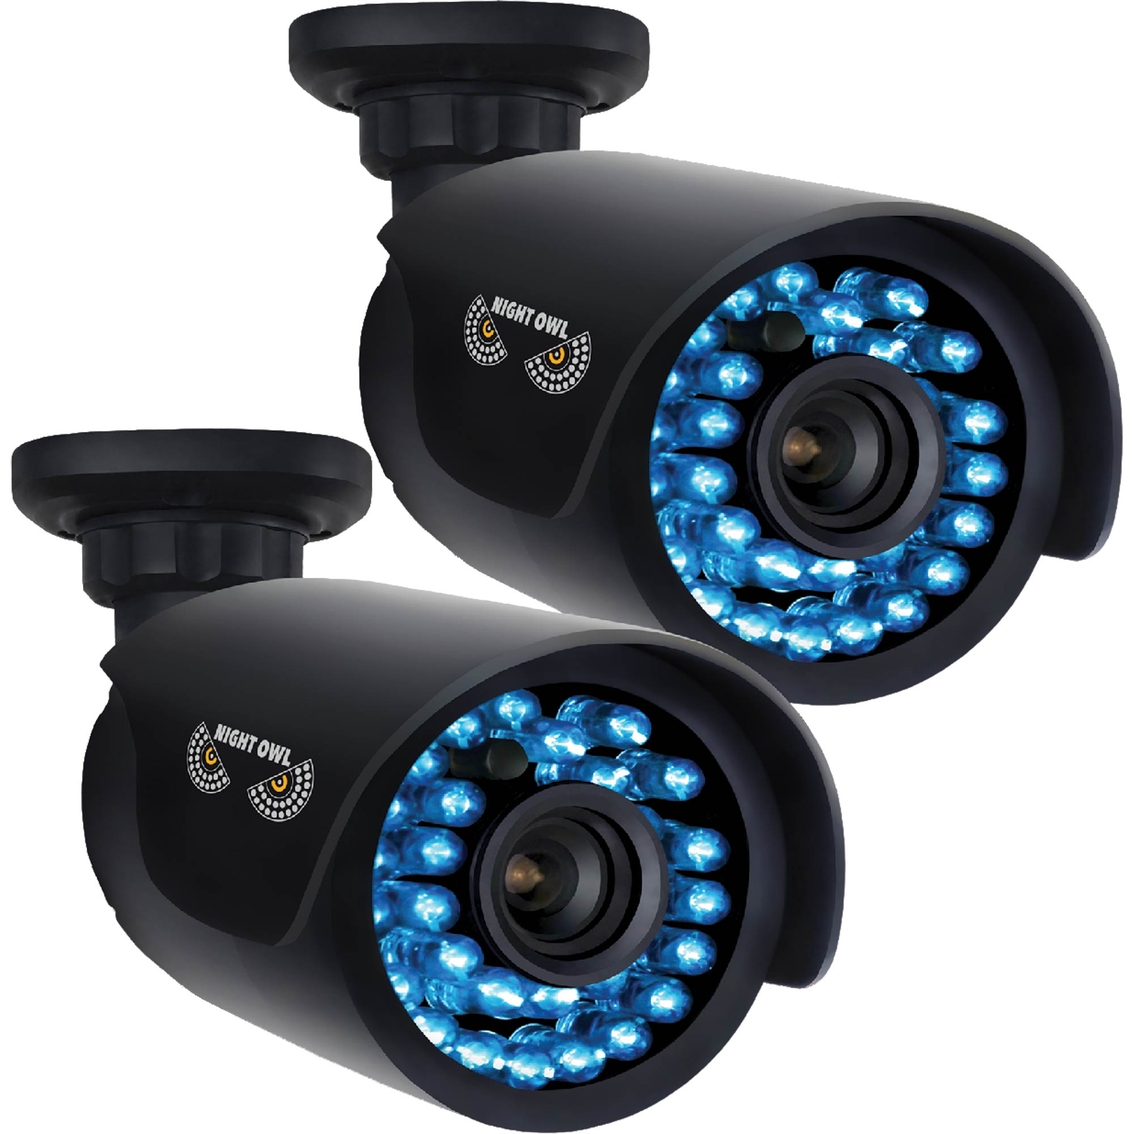 Night Owl 2-pack 720p Hd Security 